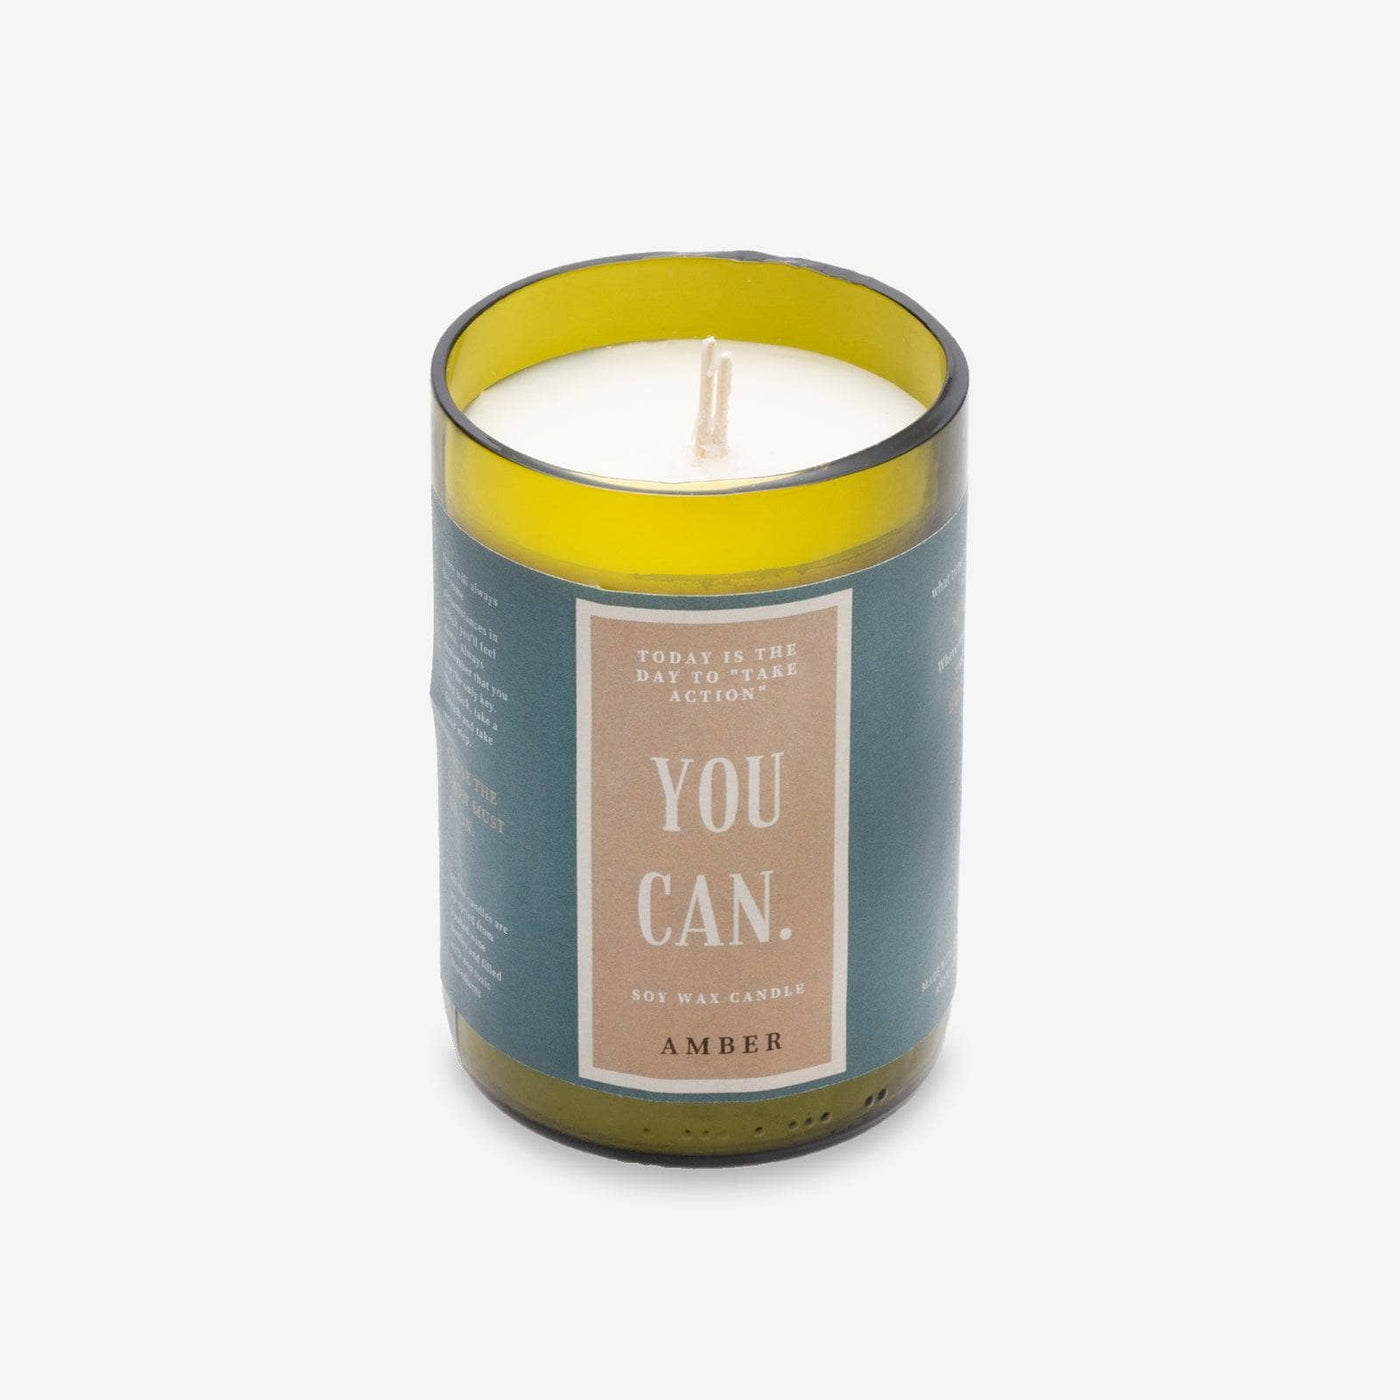 You Can Soy Wax Candle, Amber, 285 g Candles sazy.com